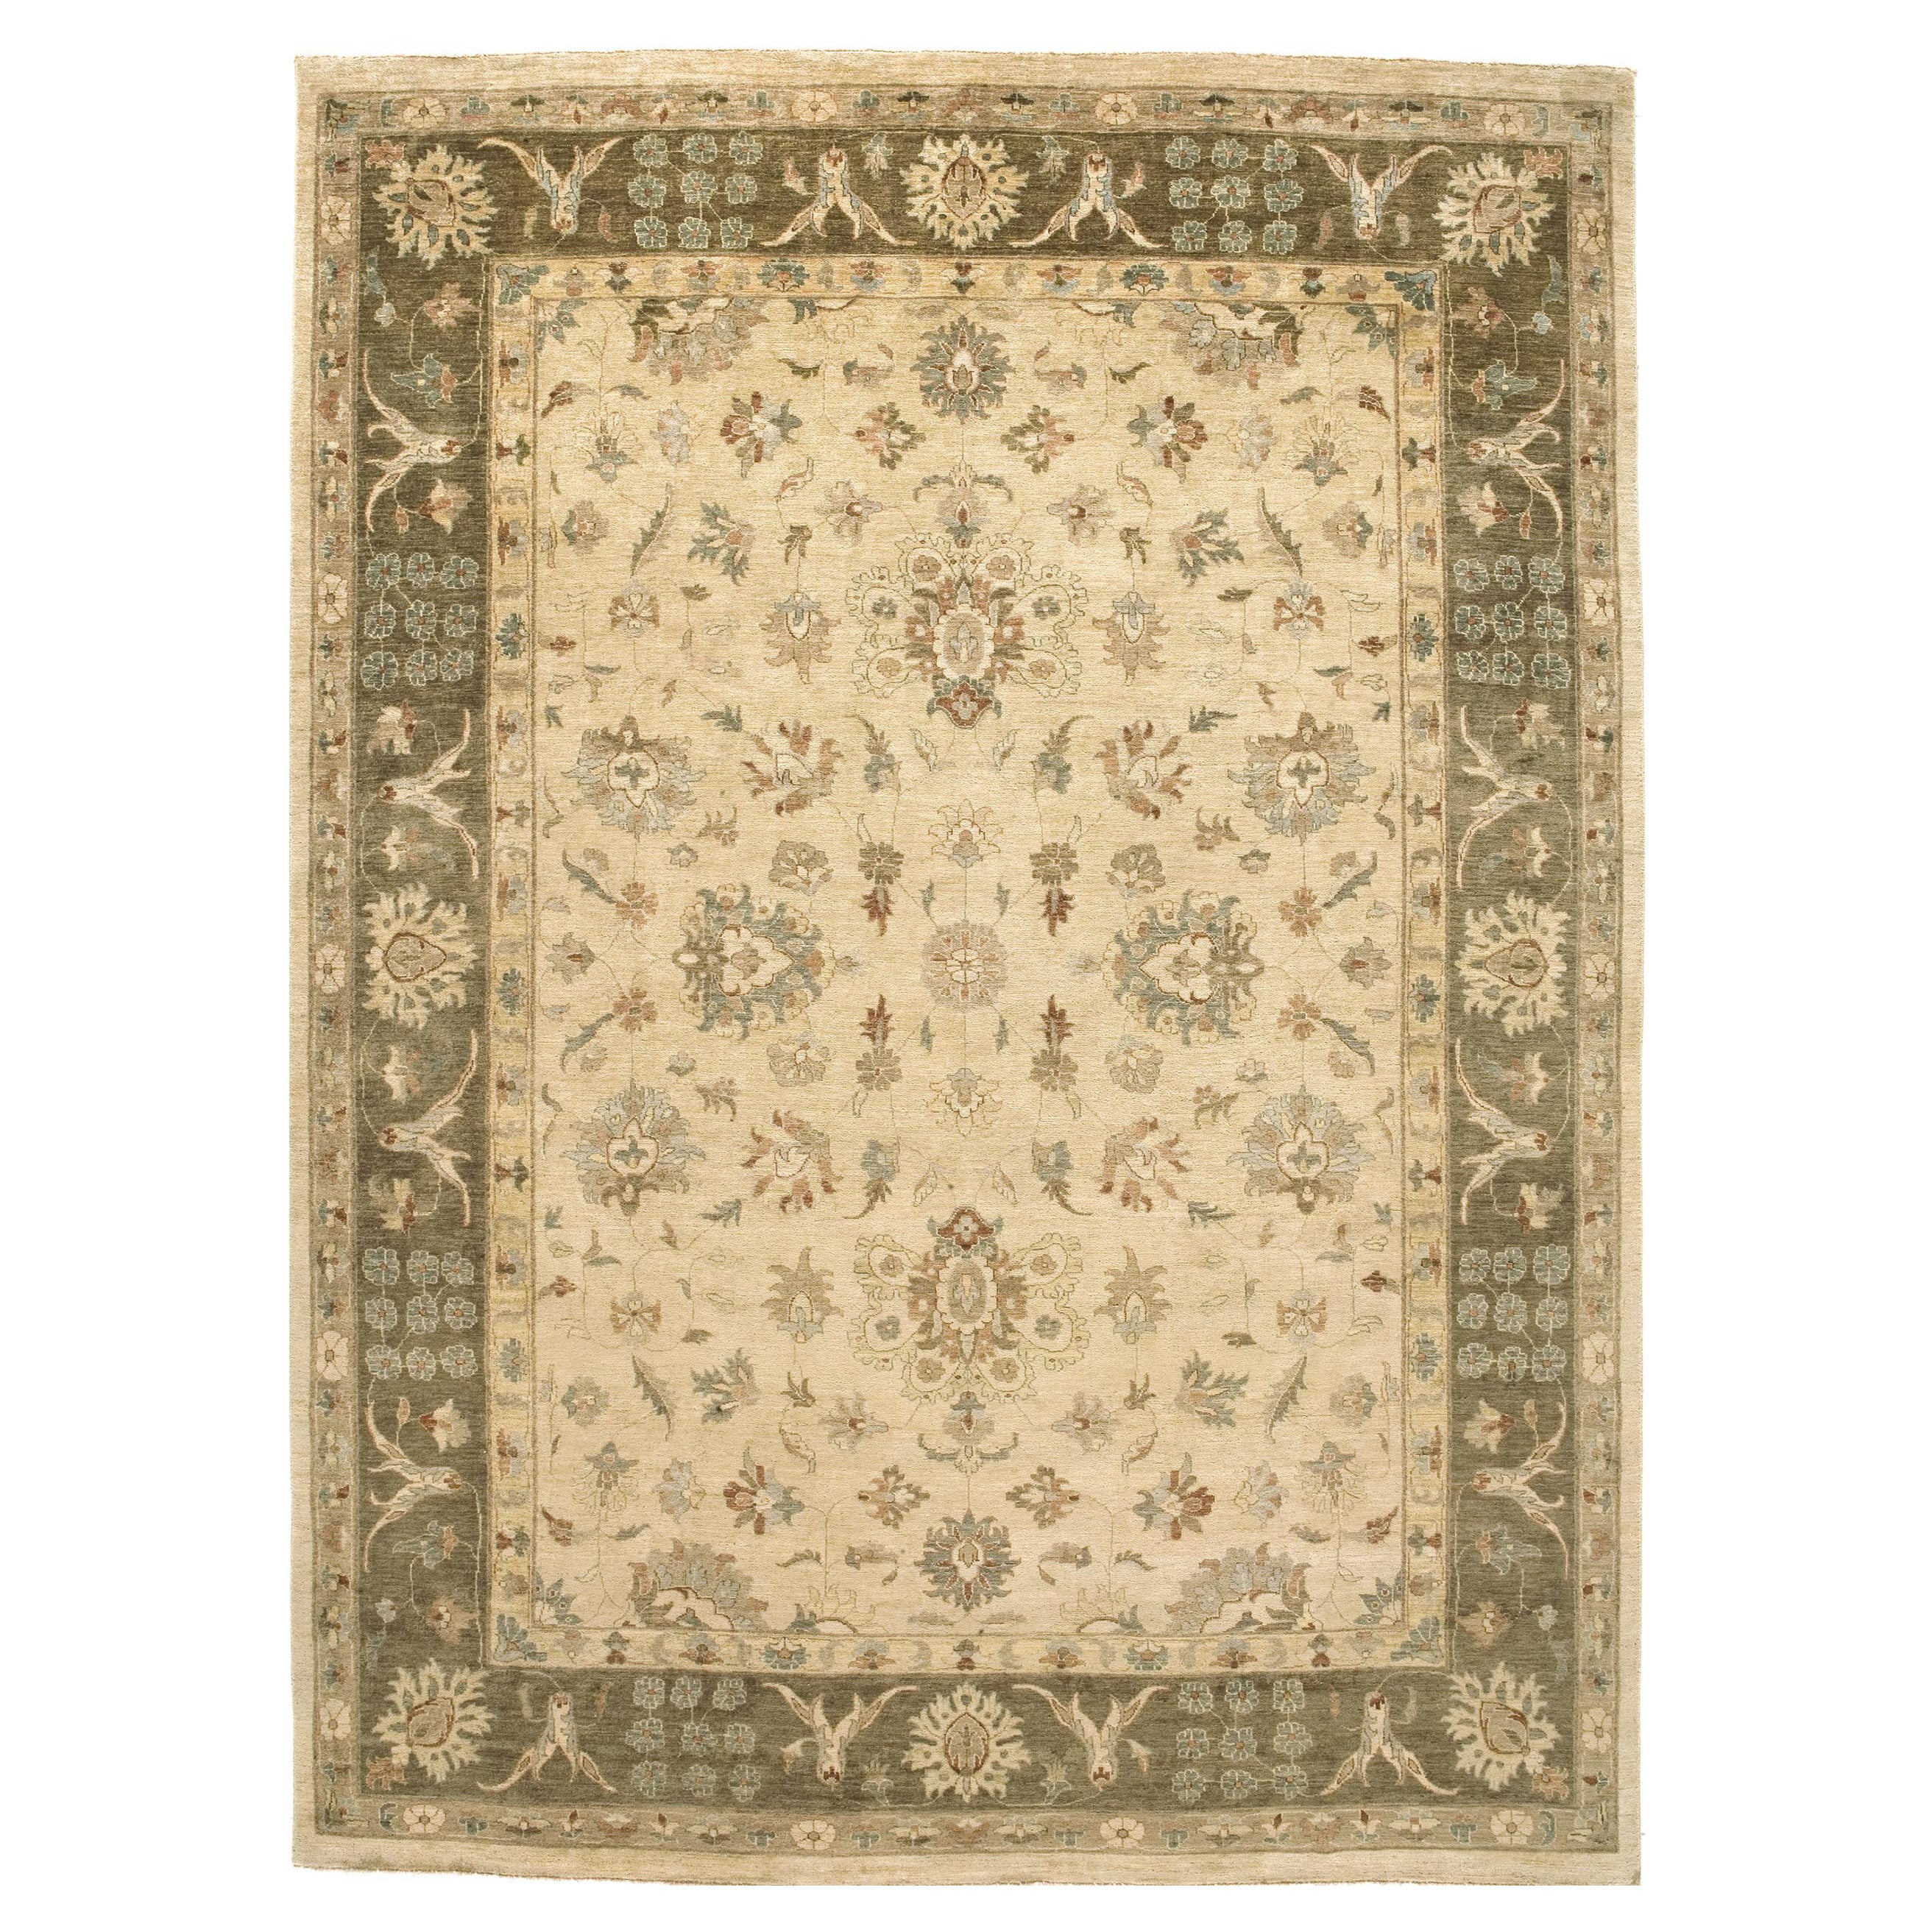 Luxury Traditional Hand-Knotted Kashan Cream& Brown 12x18 Rug